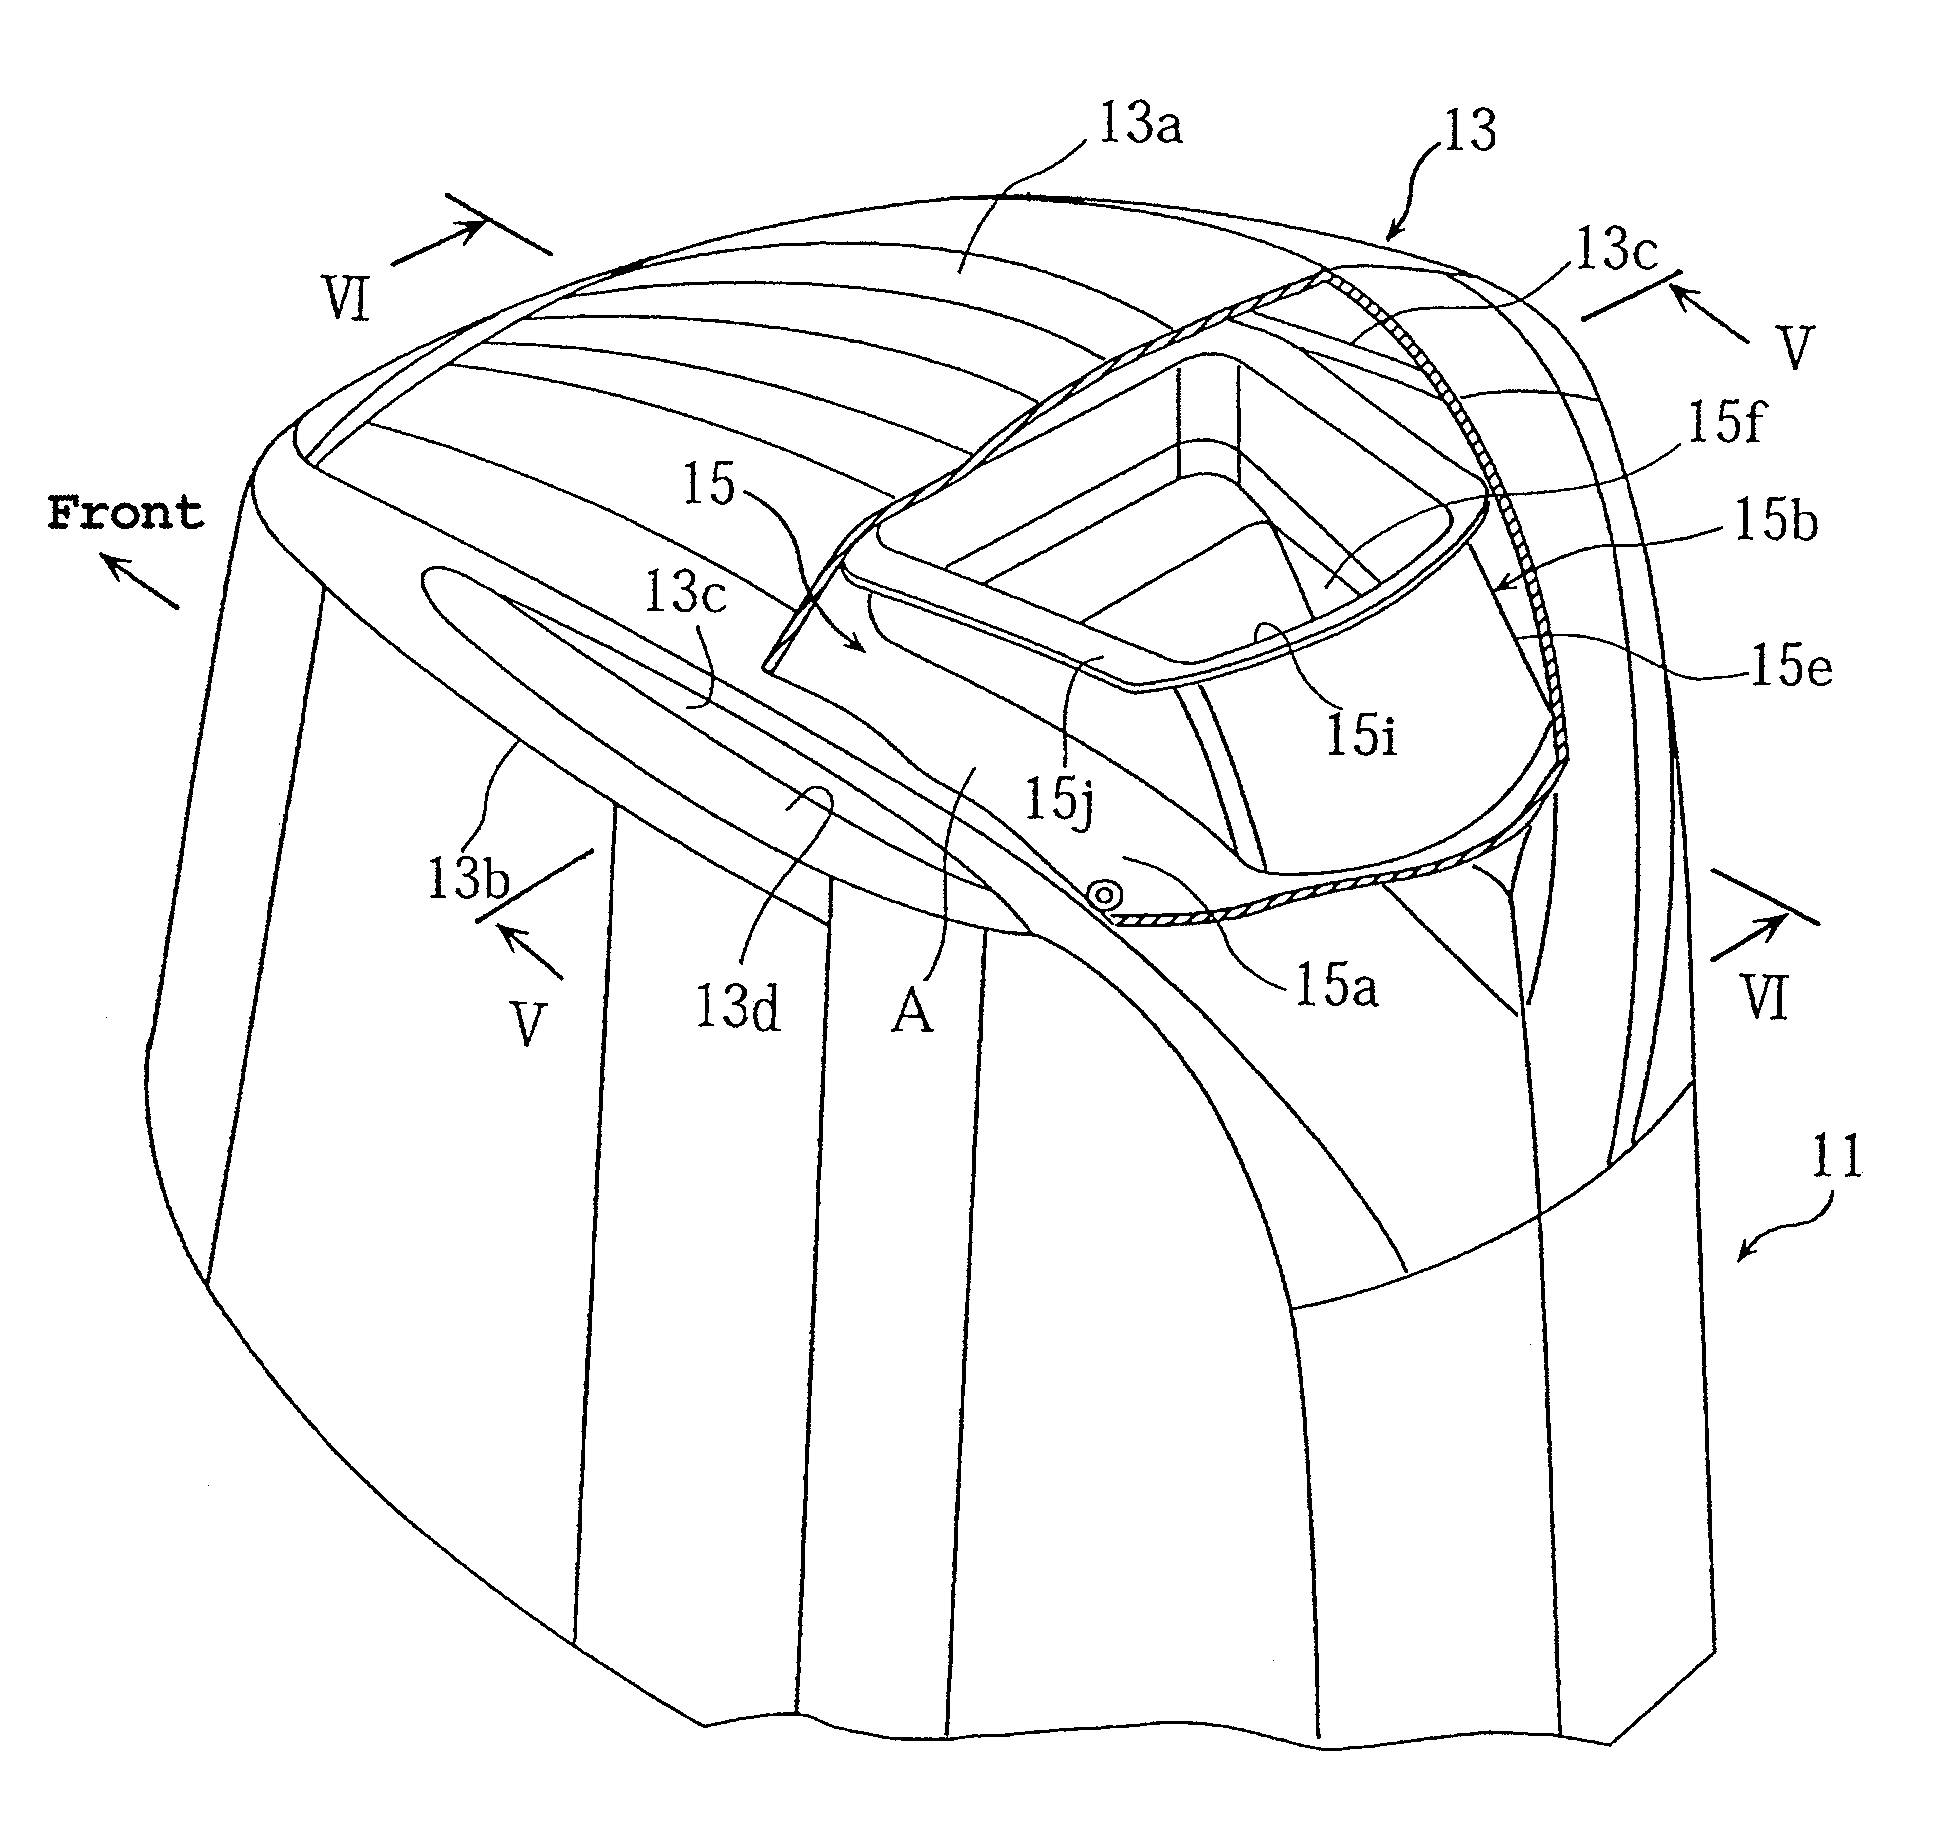 Outboard motor having a cowling